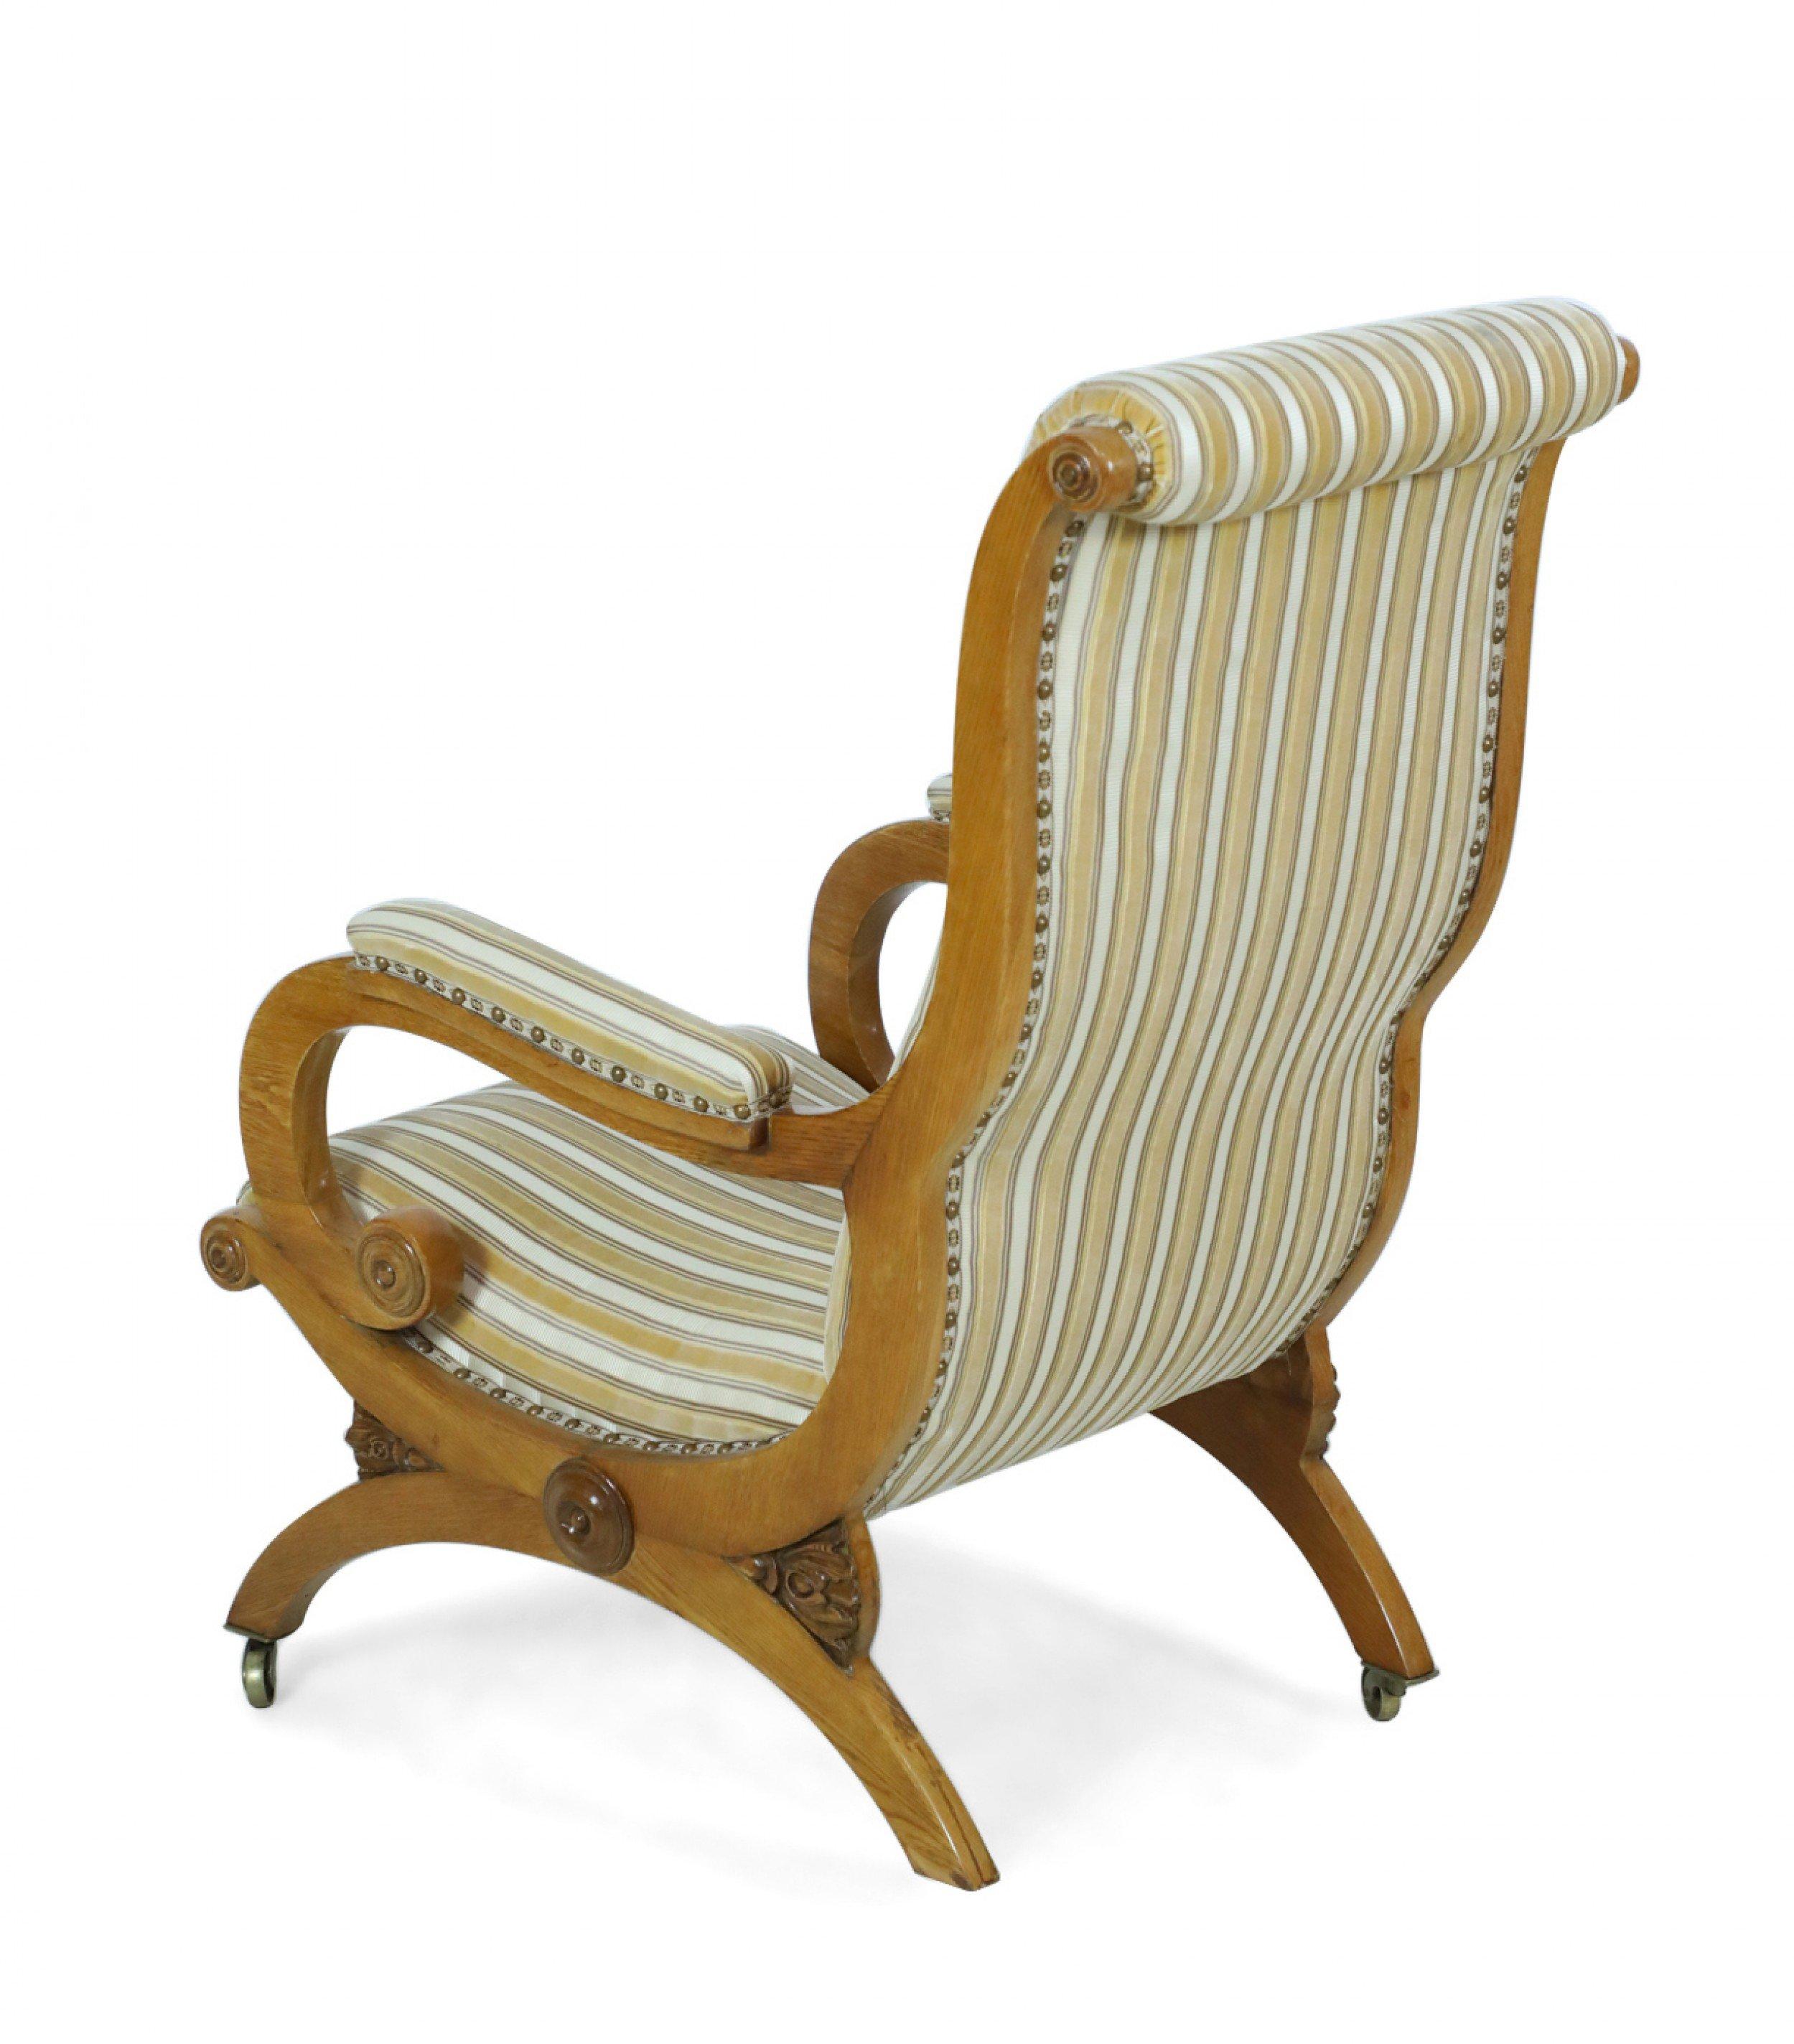 English Victorian Blond Wood Scroll Armchair with Striped Upholstery For Sale 1